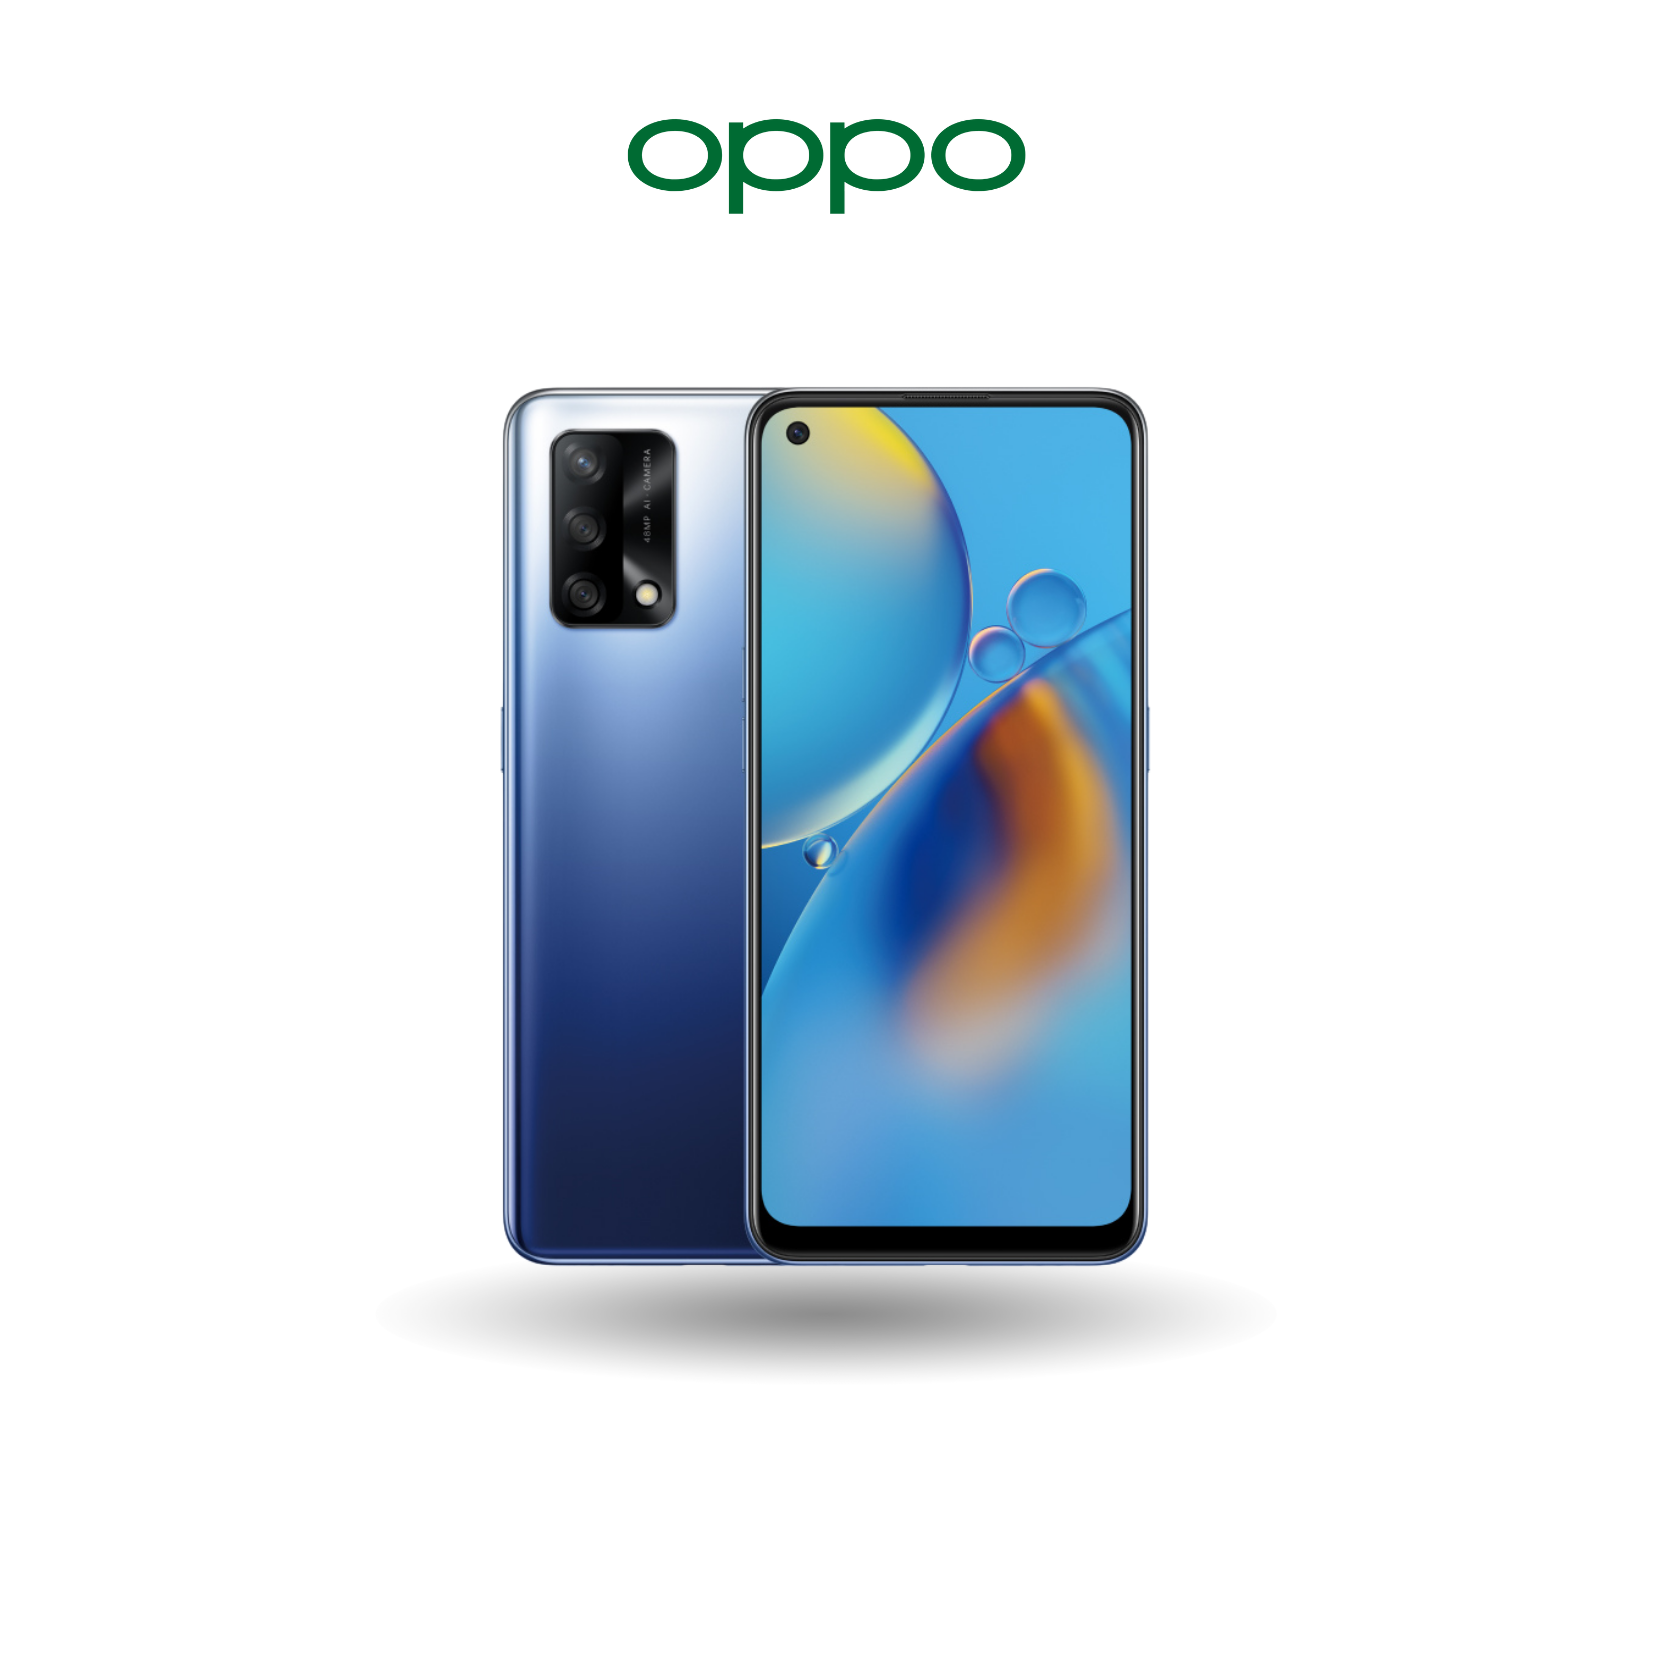 Oppo A74 128GB - AMOLED FHD + Punch-Hole Display | Game Focus Mode | 33W Flash